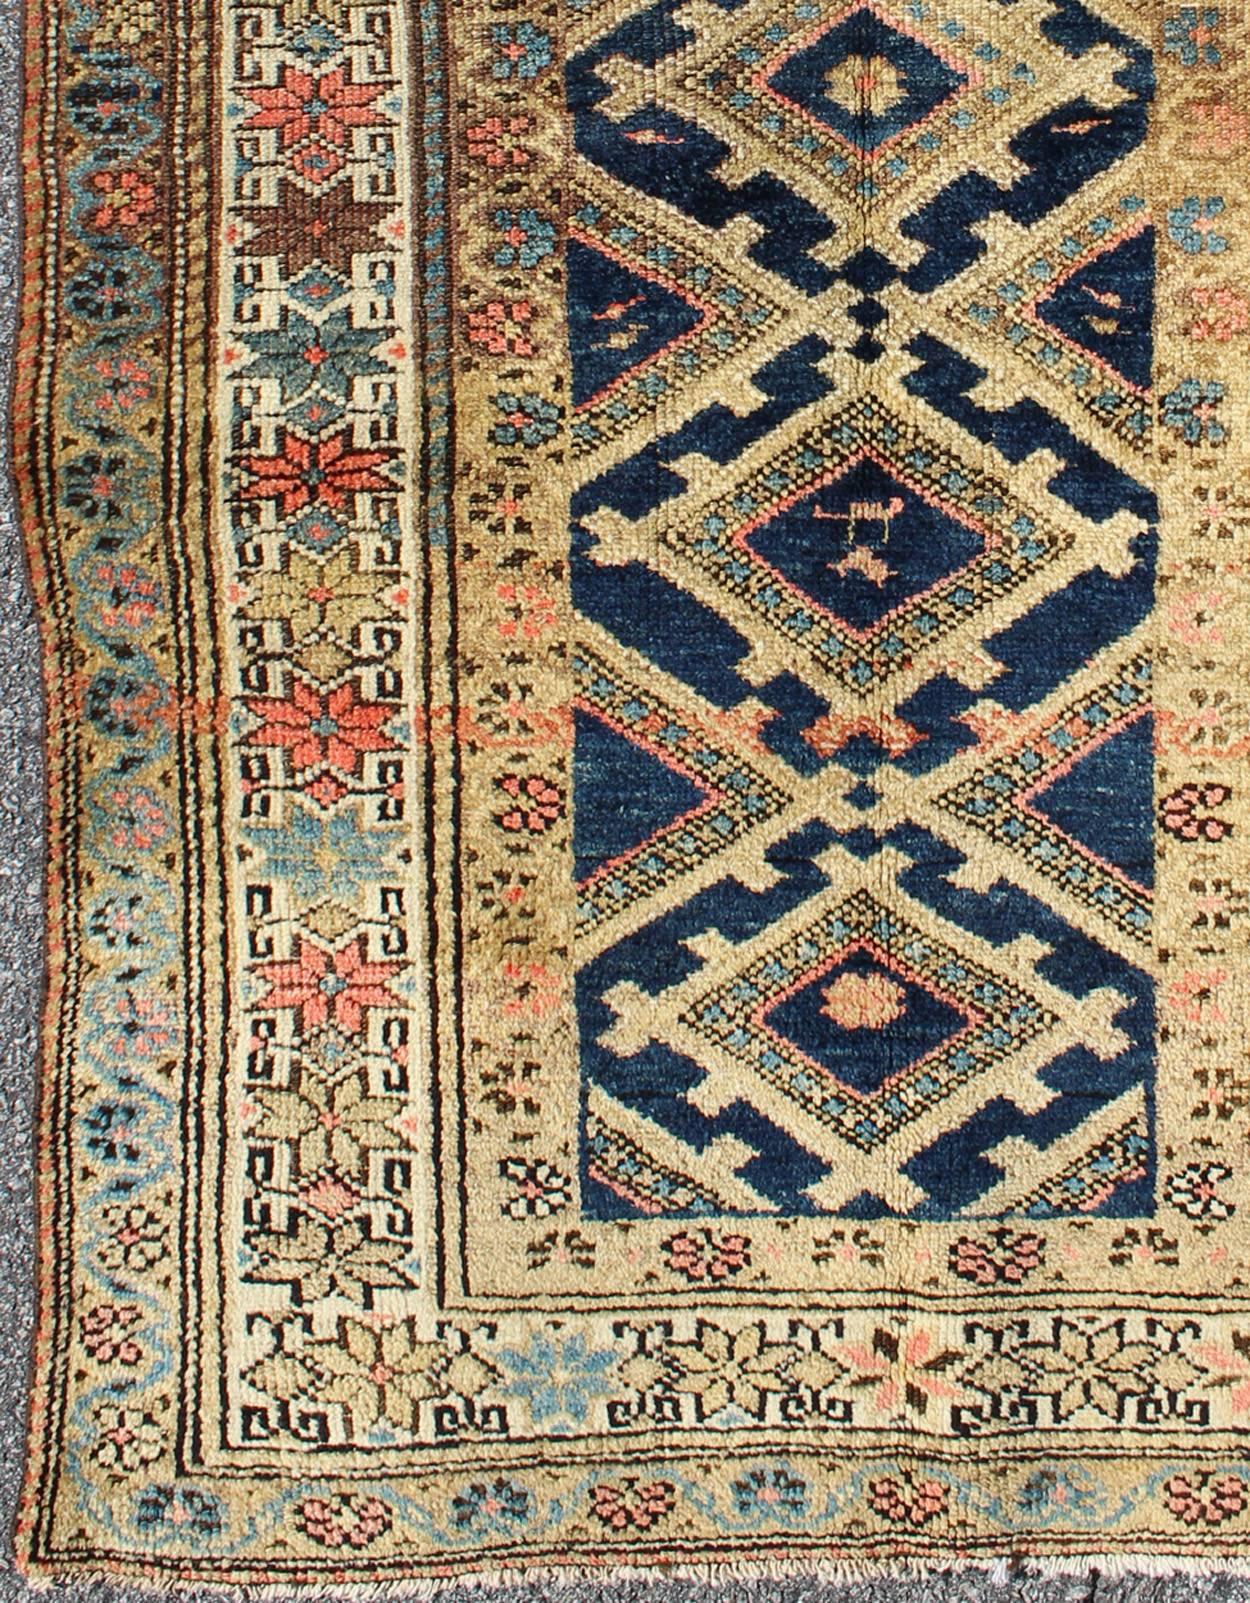 Antique early 20th century Persian Hamadan rug with diamond medallions, rug l11-1203, country of origin / type: Iran / Tribal, circa 1920

This Persian Hamadan rug from early 20th century Iran features five interconnected, diamond-shaped